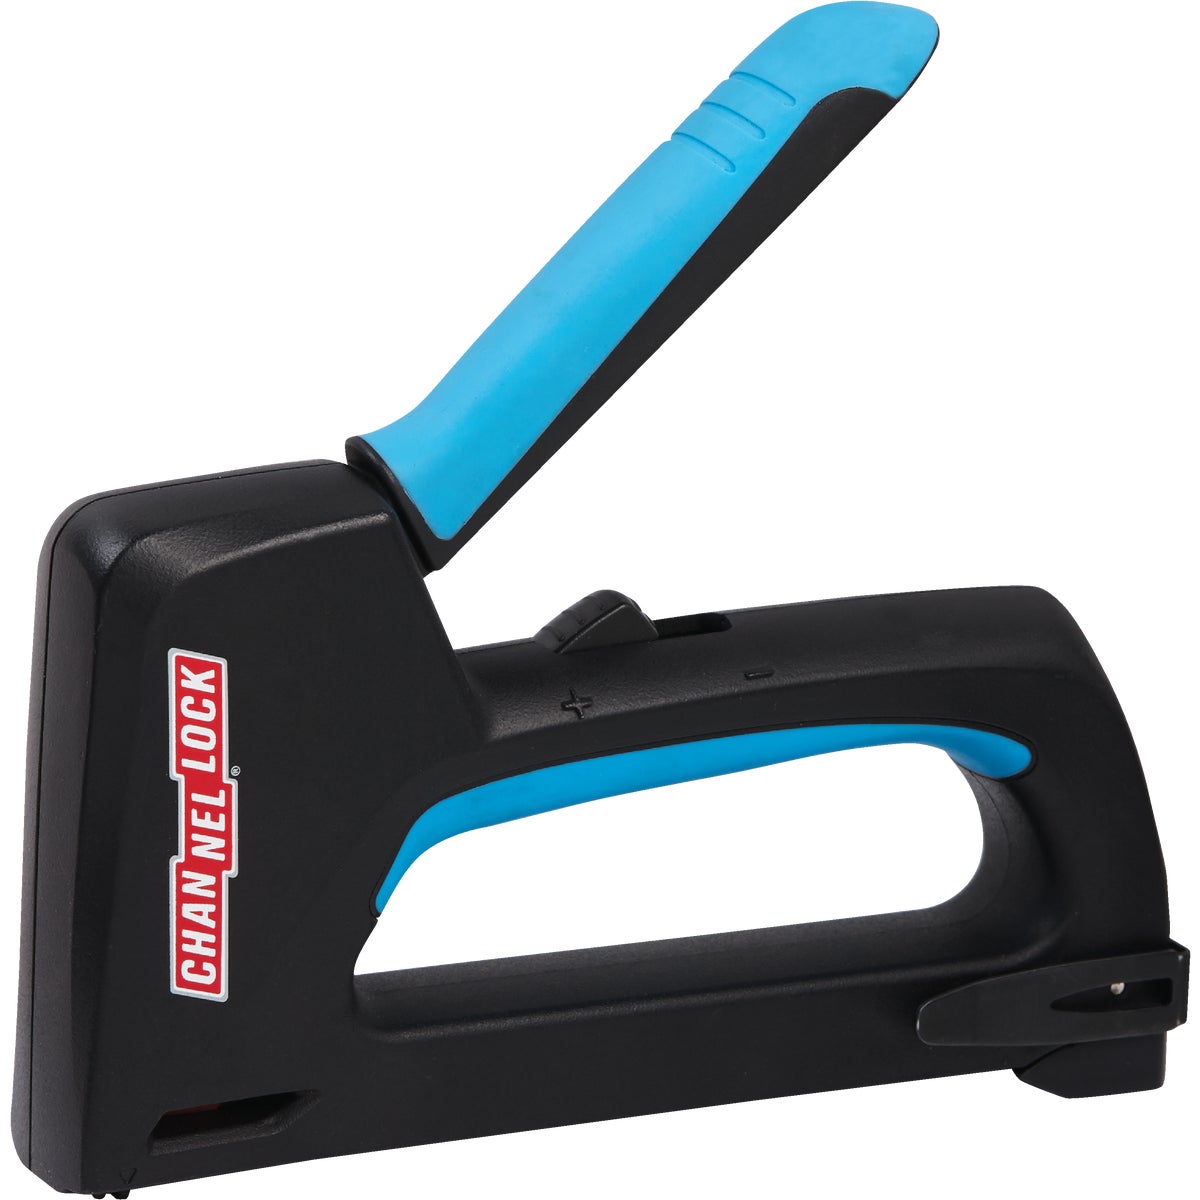 Item 303467, The Channellock 5 in 1 stapler drives 5 different types of fasteners with 